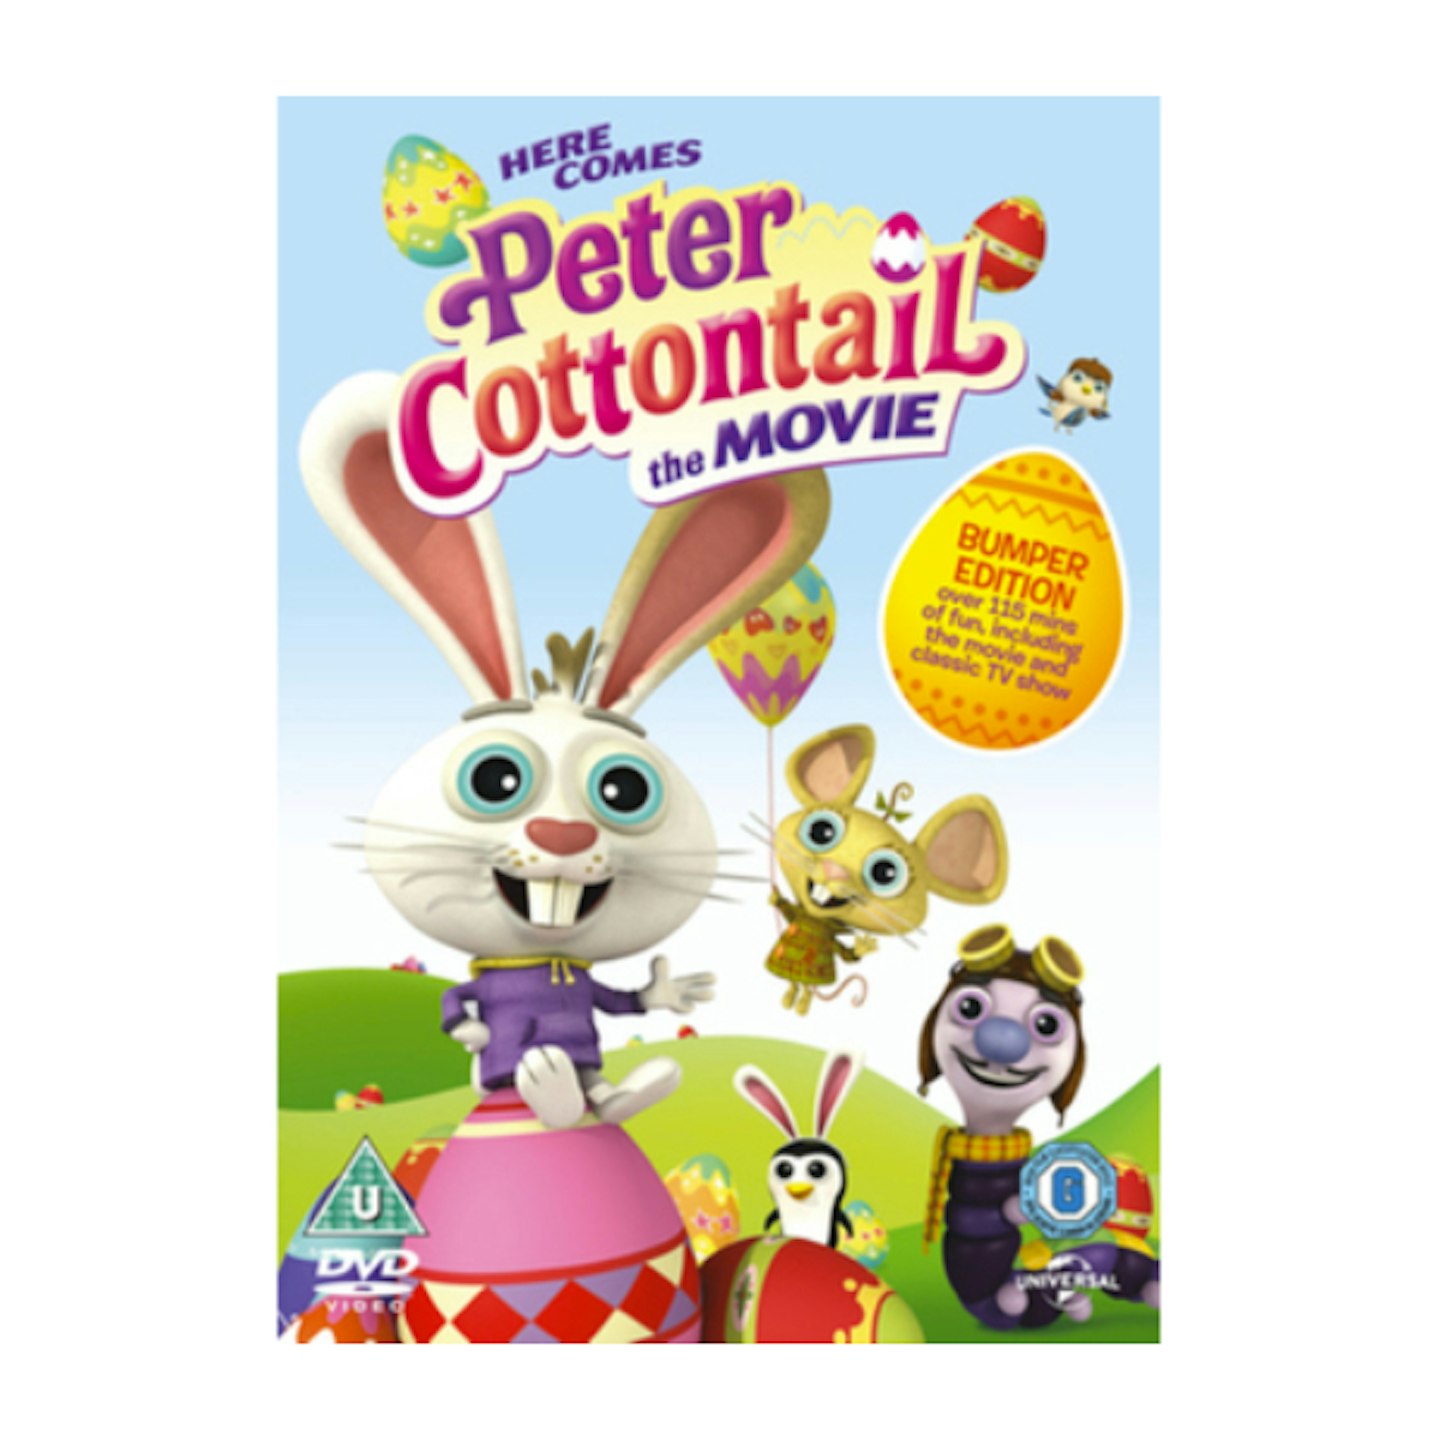 Here Comes Peter Cottontail (2014)